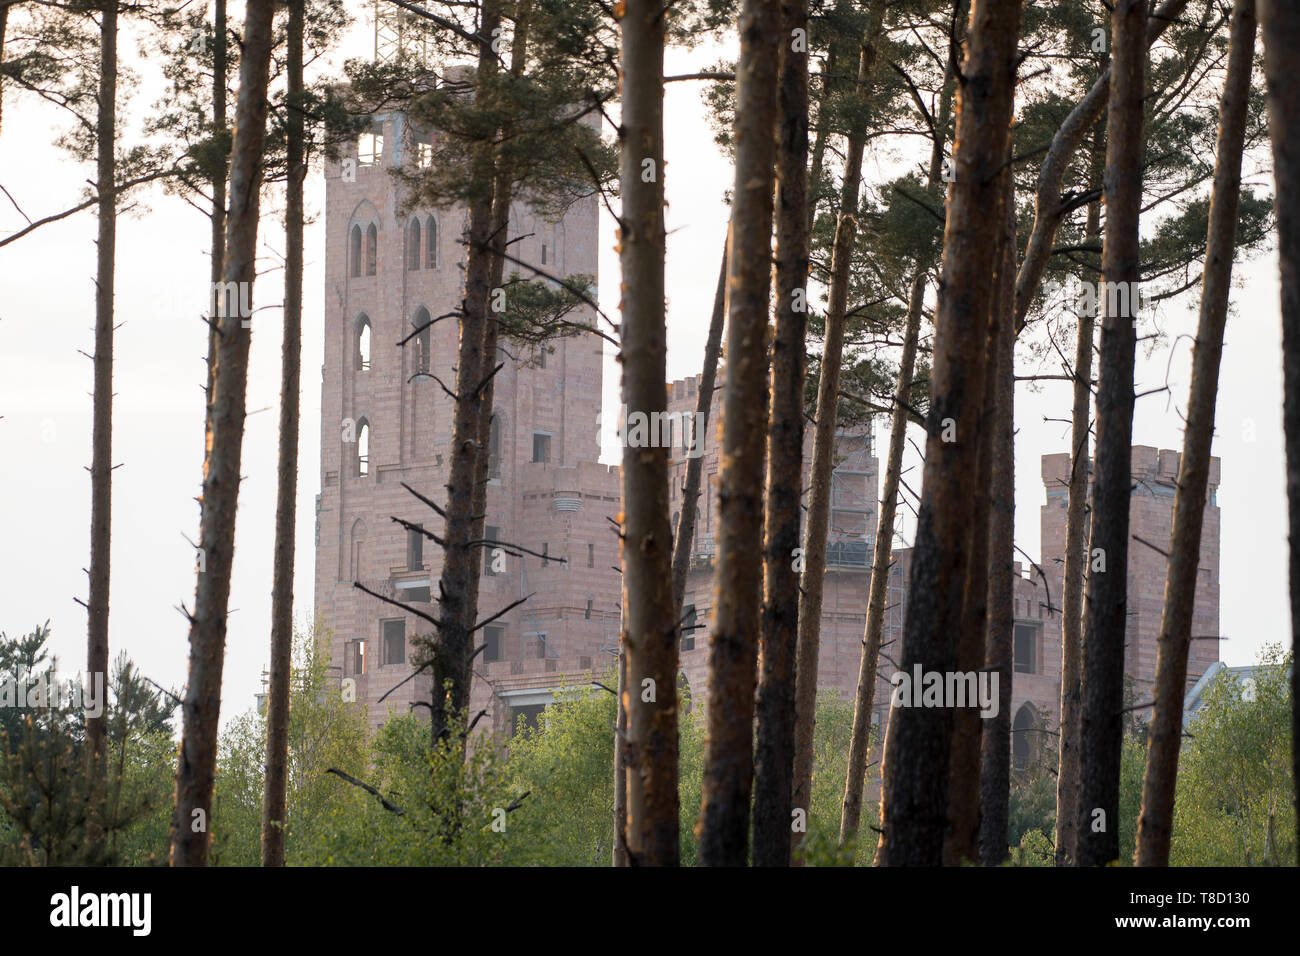 Construction site of multifunctional building castle in Stobnica, Poland. May 1st 2019 © Wojciech Strozyk / Alamy Stock Photo Stock Photo